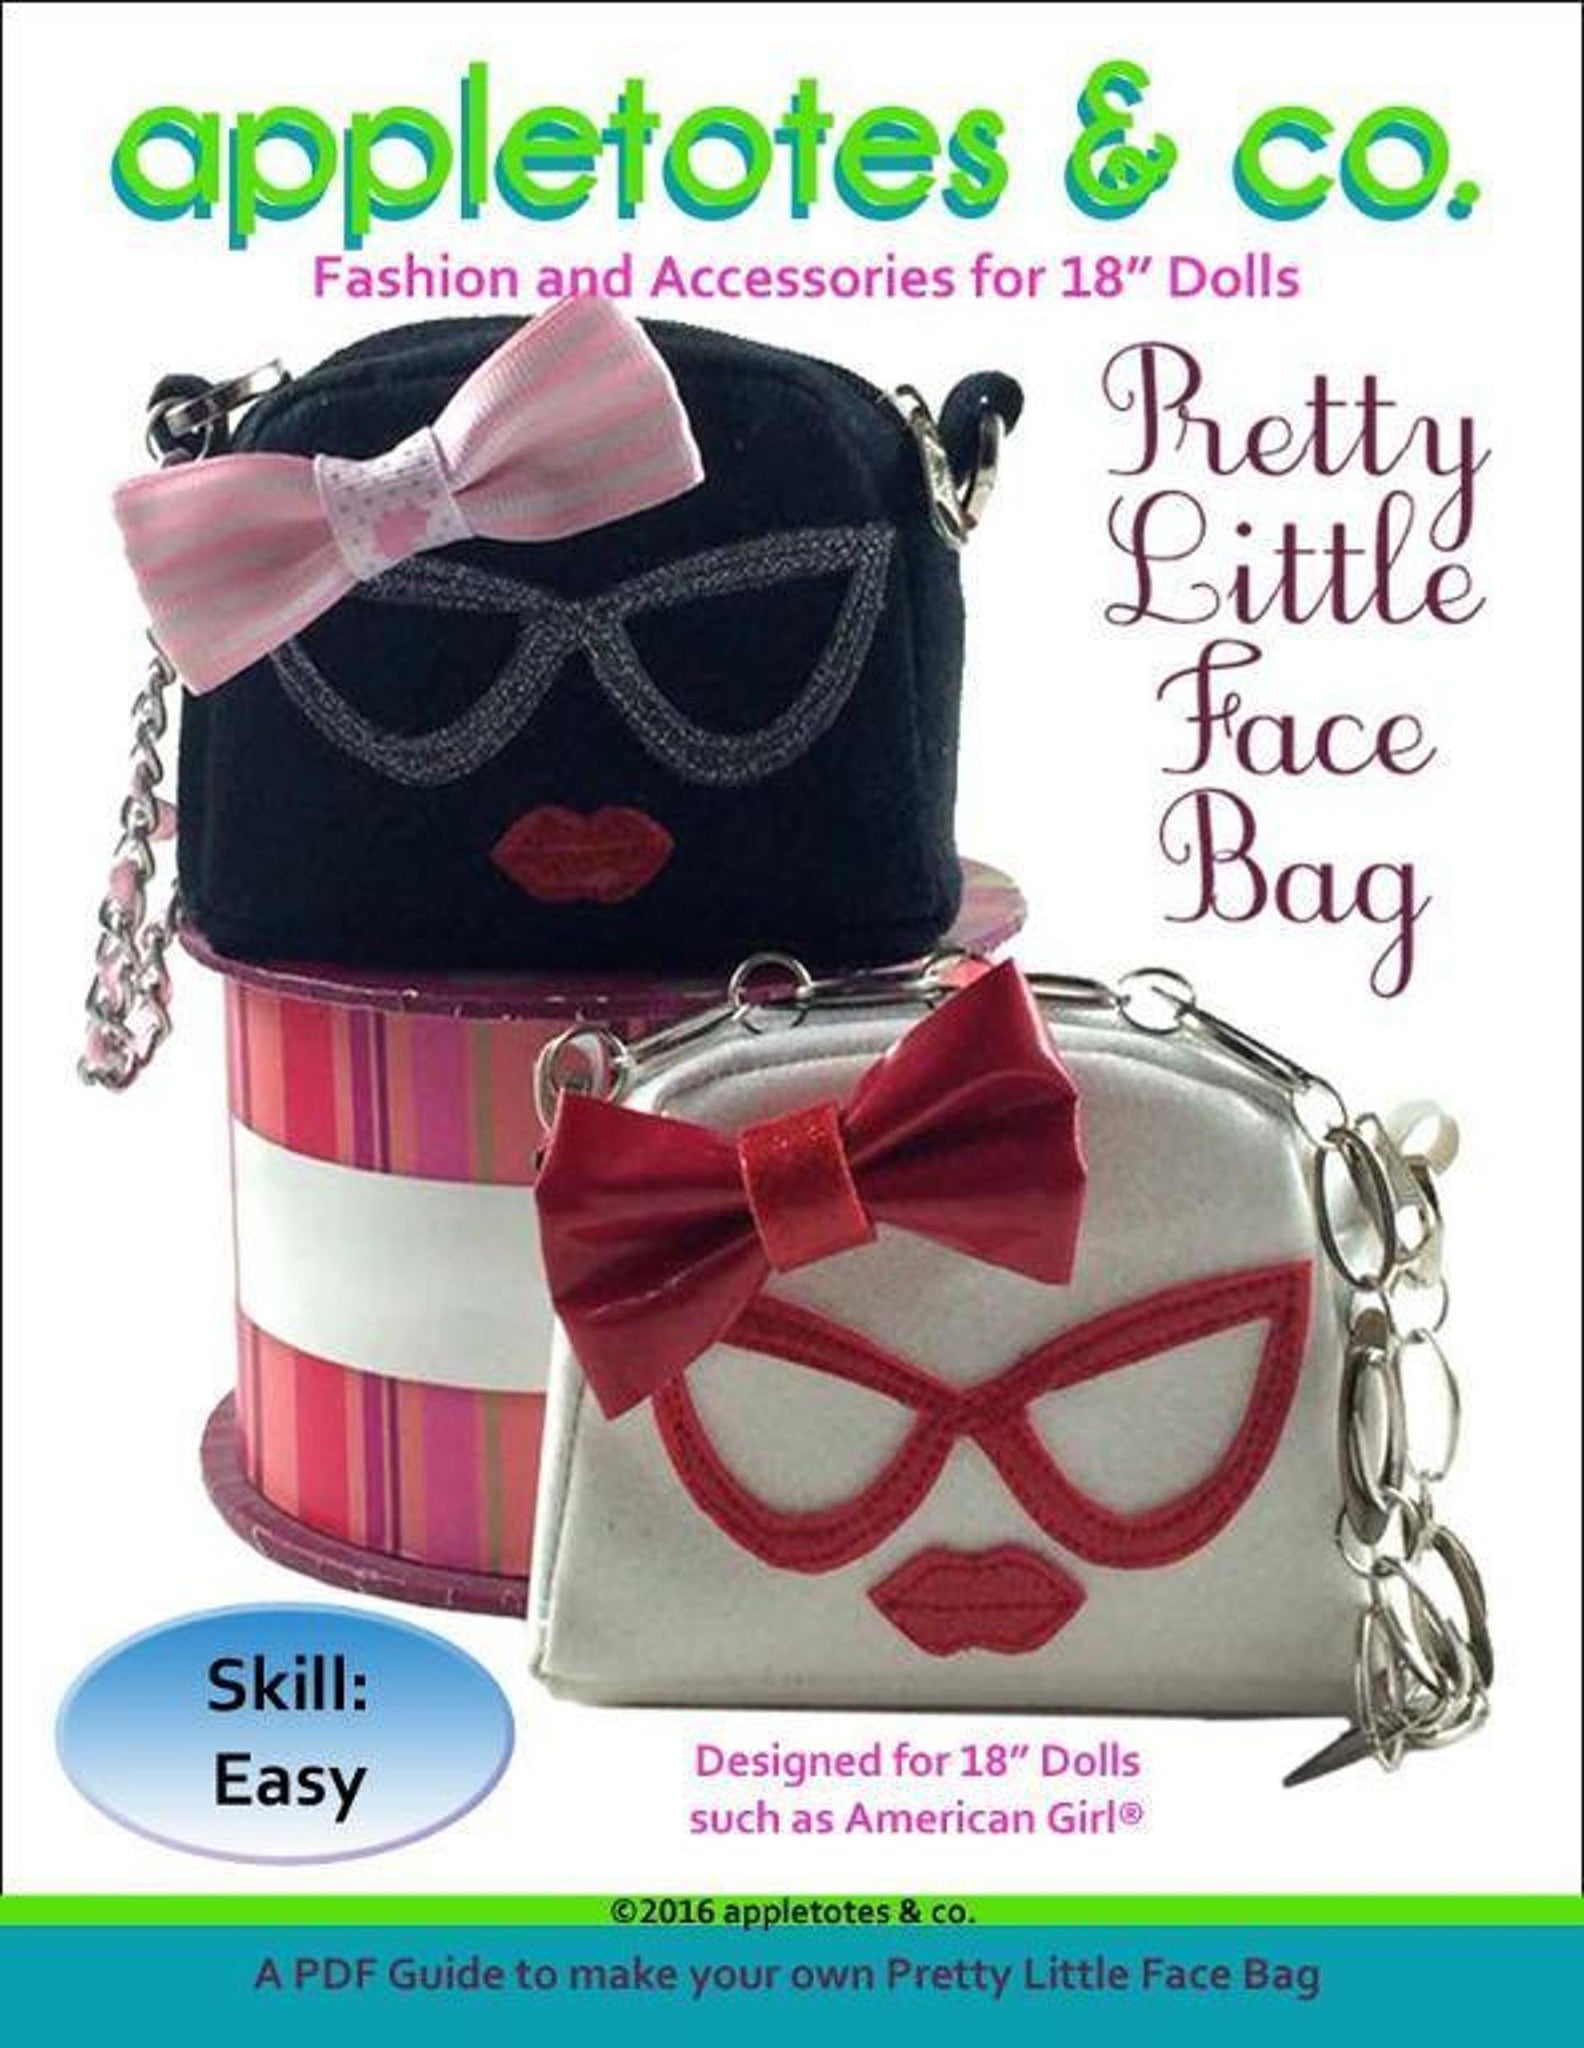 Pretty Little Face Bag Sewing Pattern for 18" Dolls